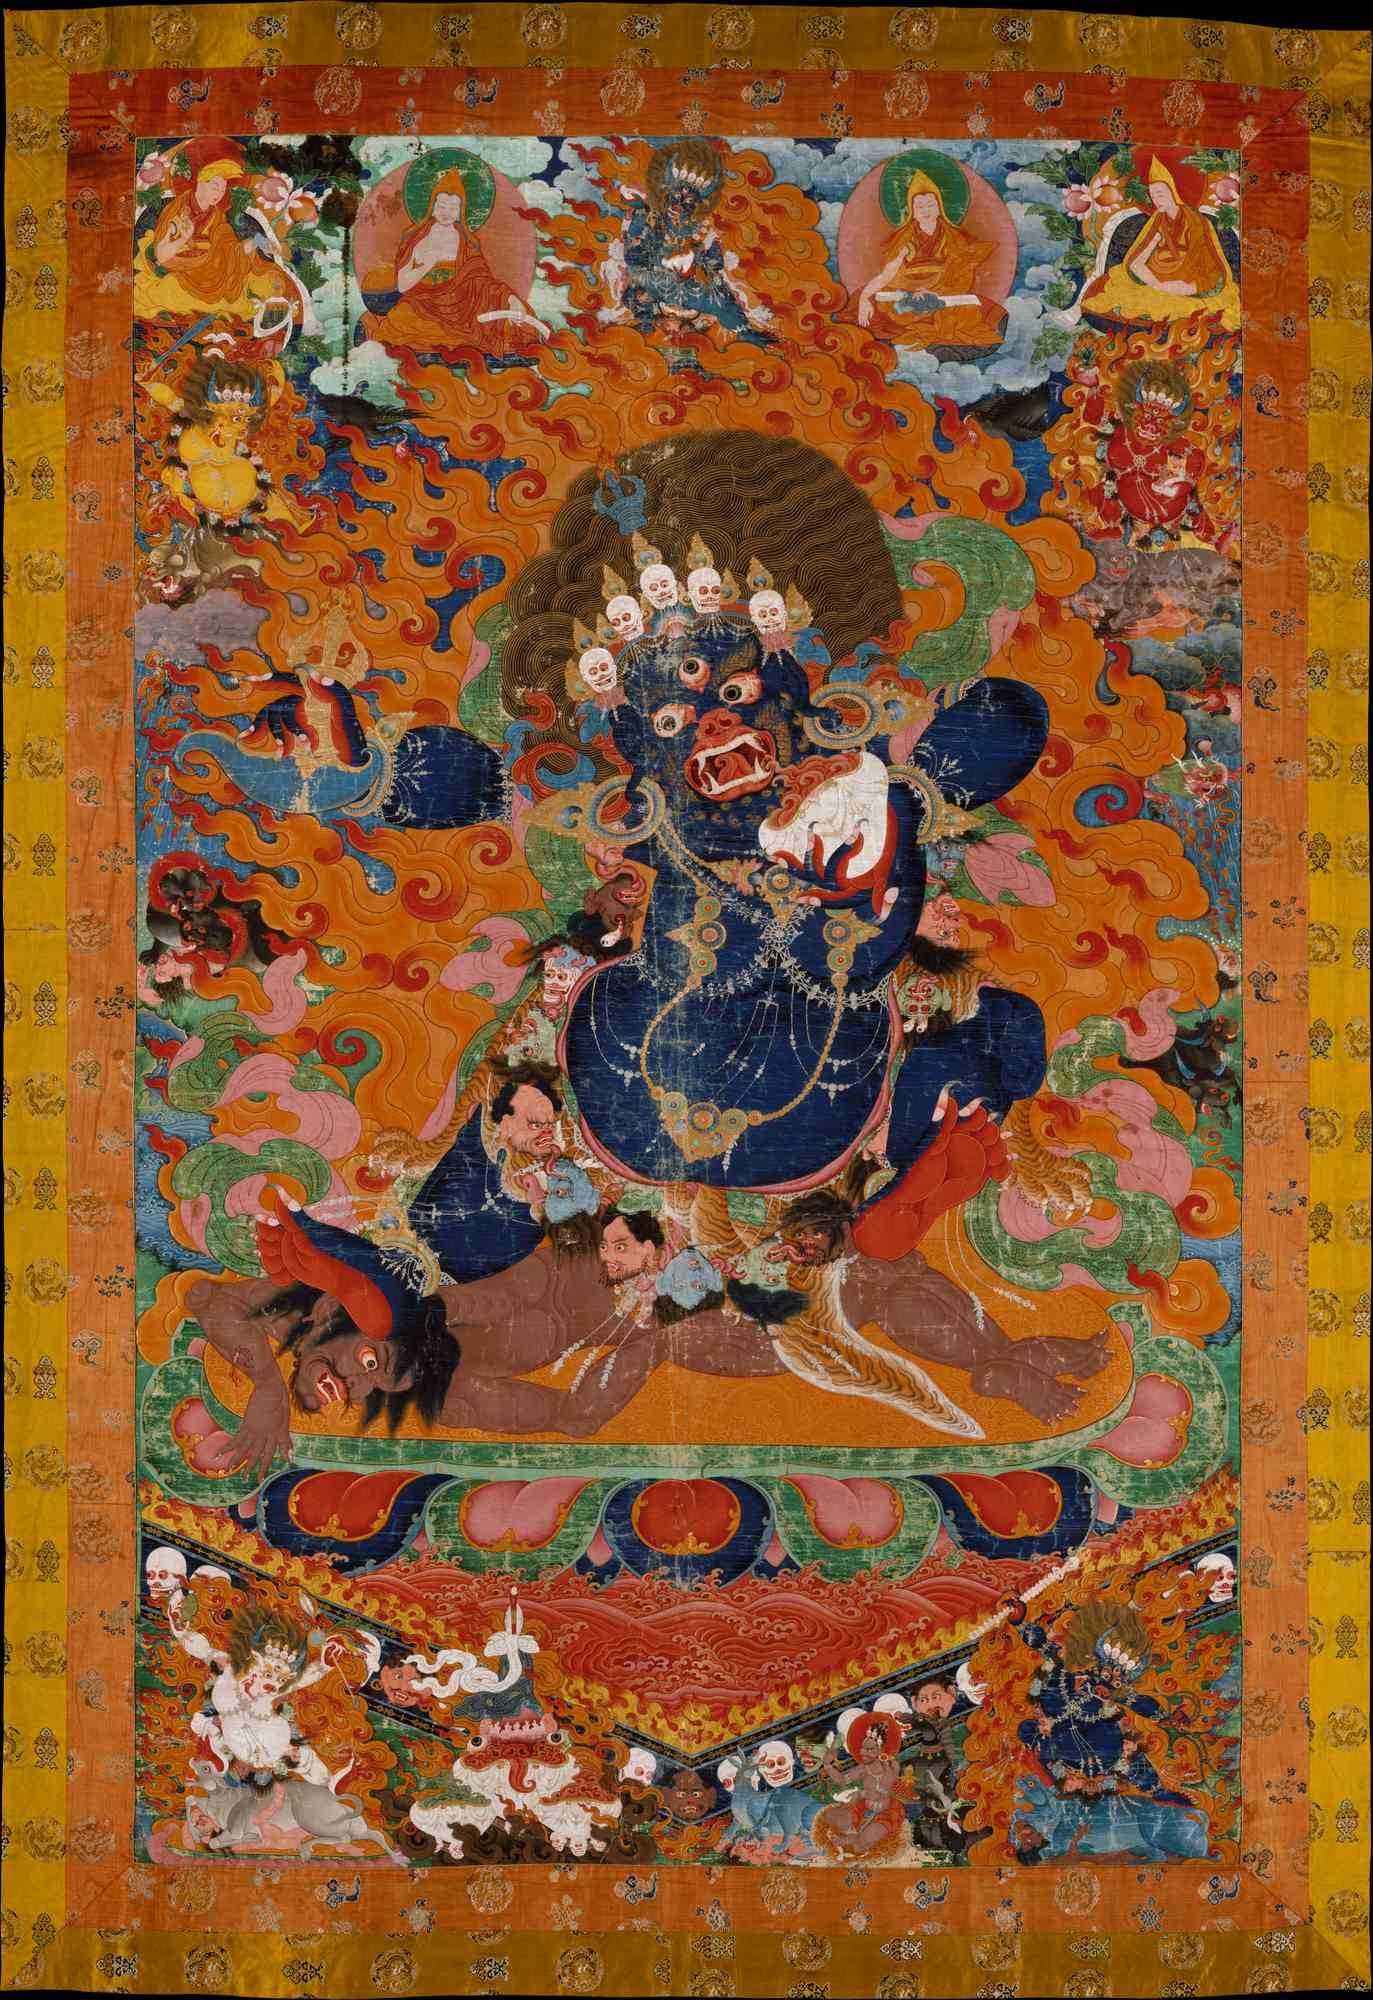 Yama - Buddhist Icon of Hell and Impermanence